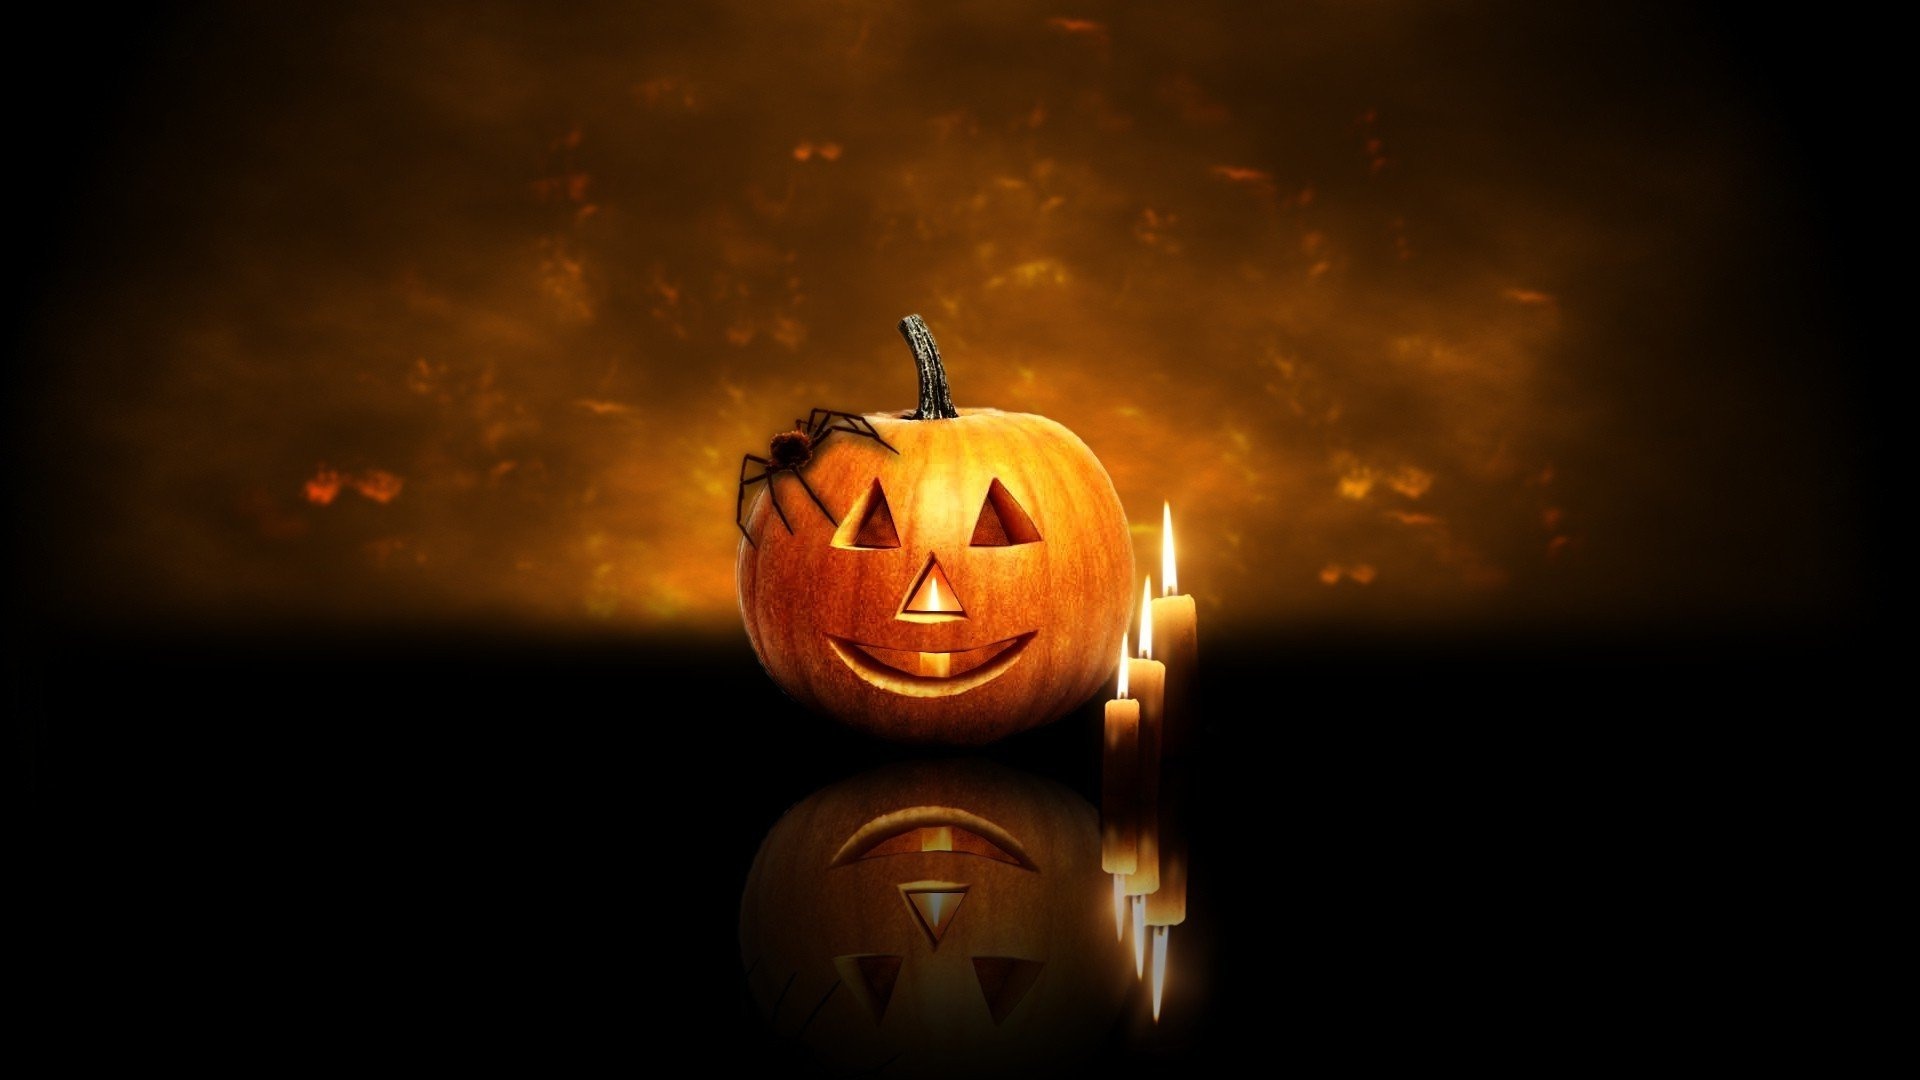 Animated Halloween wallpapers, Music and animations, Spooky vibes, Festive atmosphere, 1920x1080 Full HD Desktop